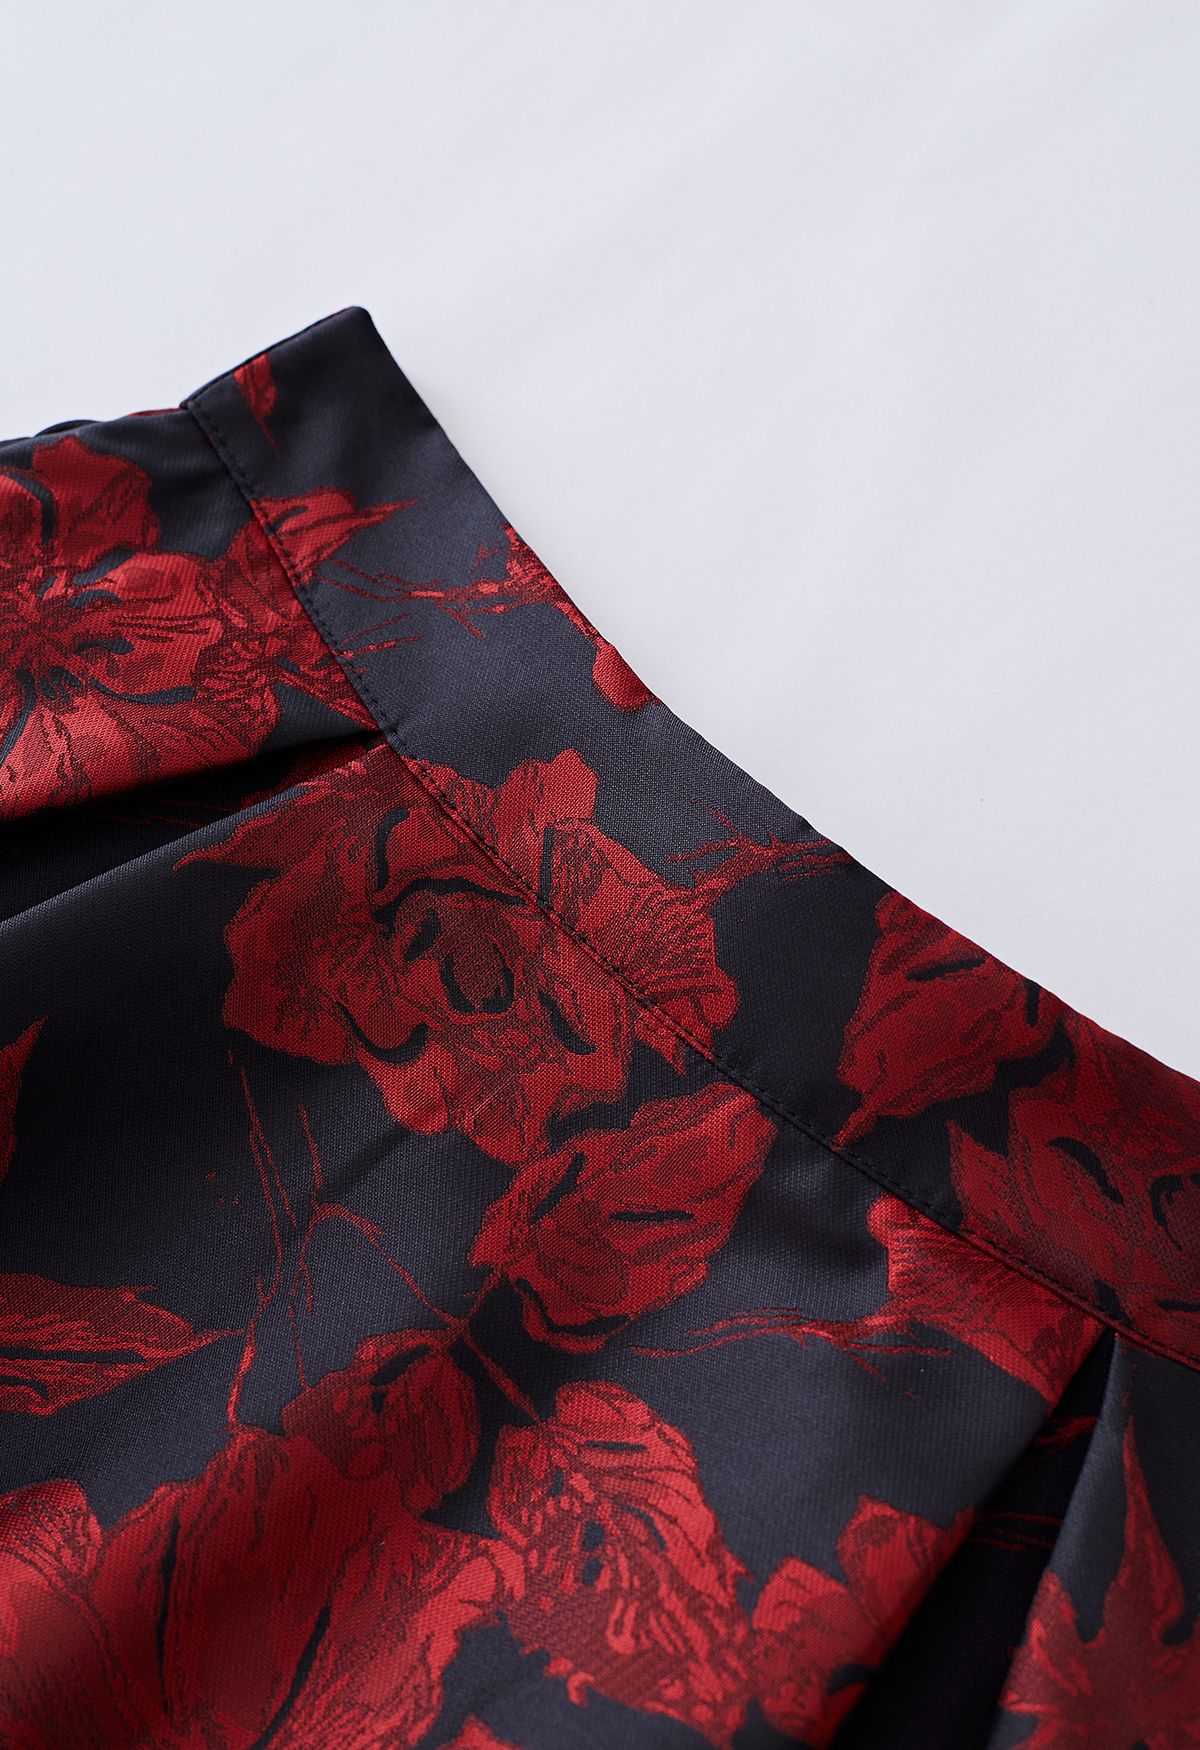 Mysterious Red Rose Jacquard A-Line Skirt